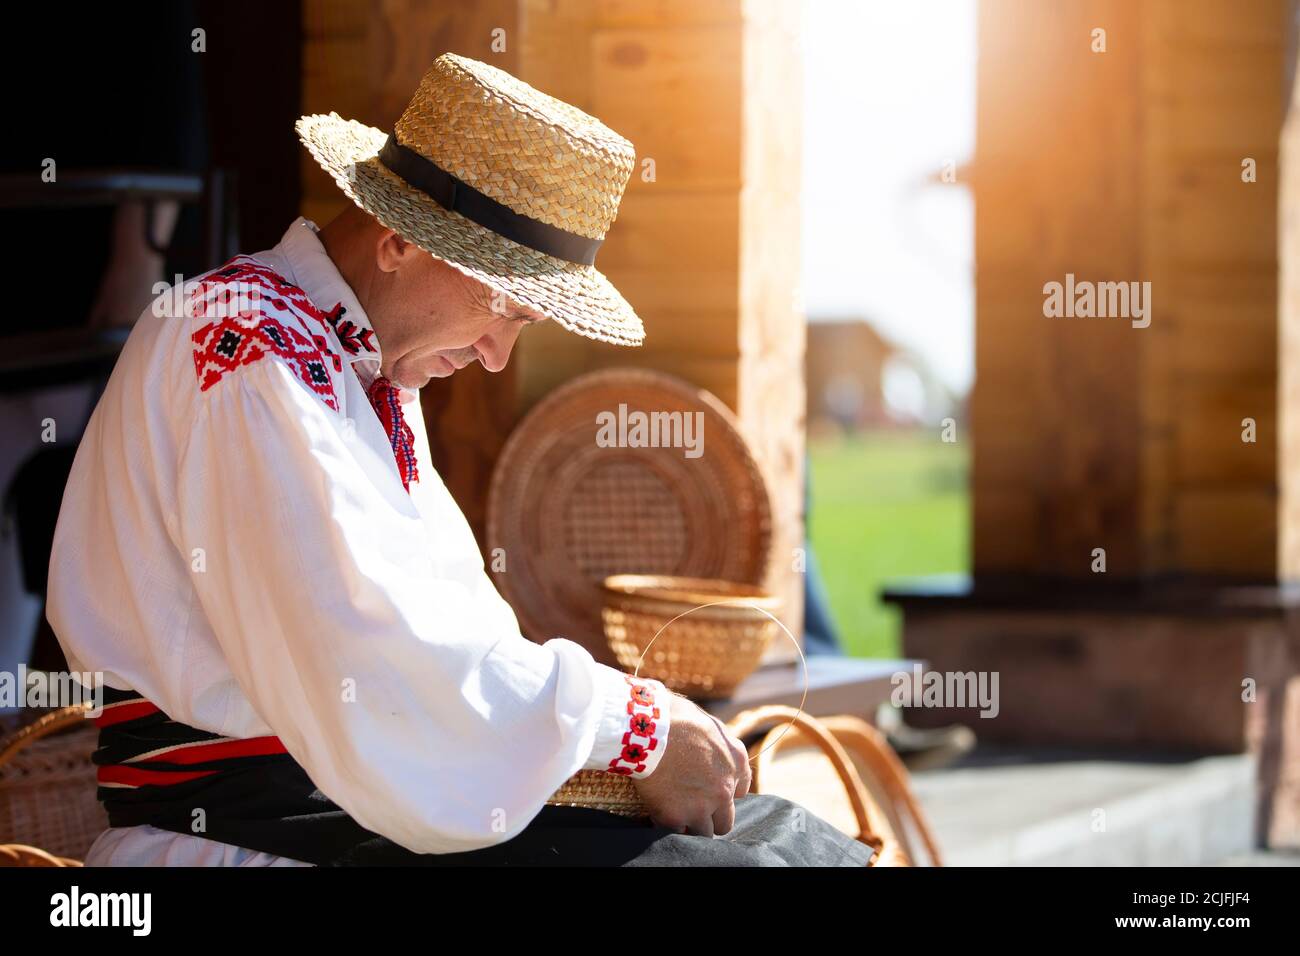 A Ukrinsky or Belarusian craftsman in embroidered shirt weaves baskets from birch bark. The man makes birch baskets. Stock Photo